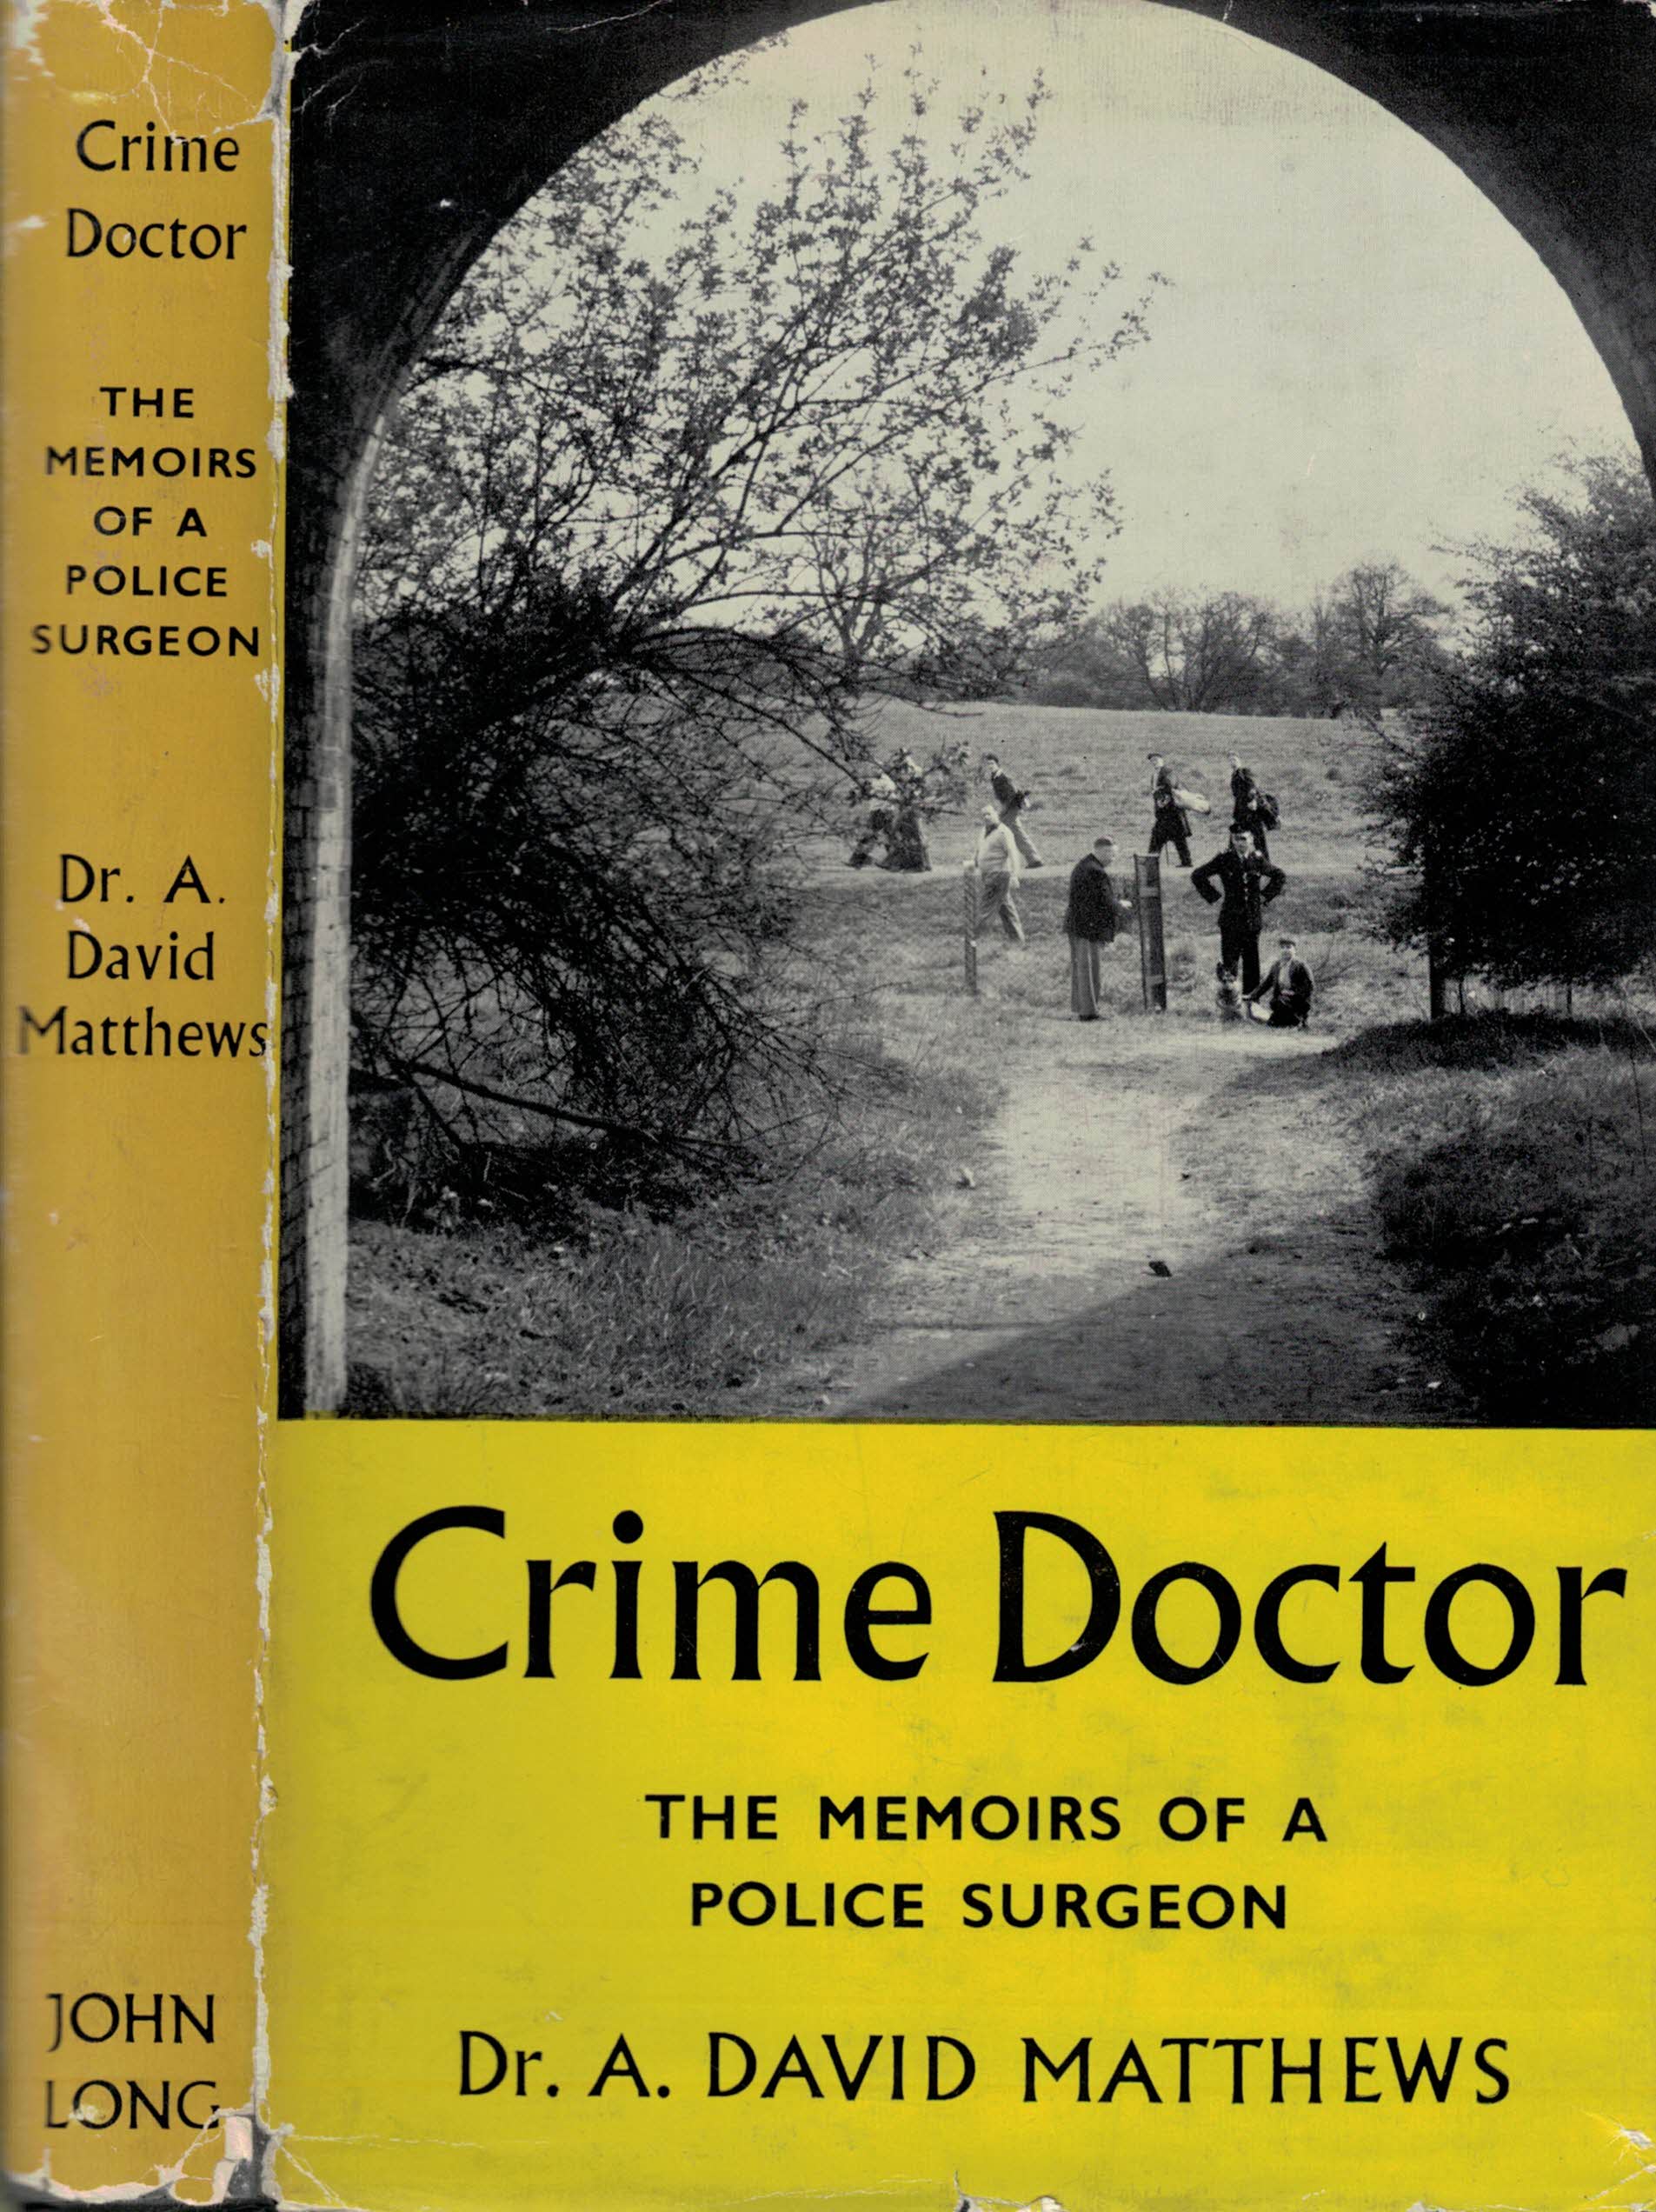 Crime Doctor. The Memoirs of a Police Surgeon.